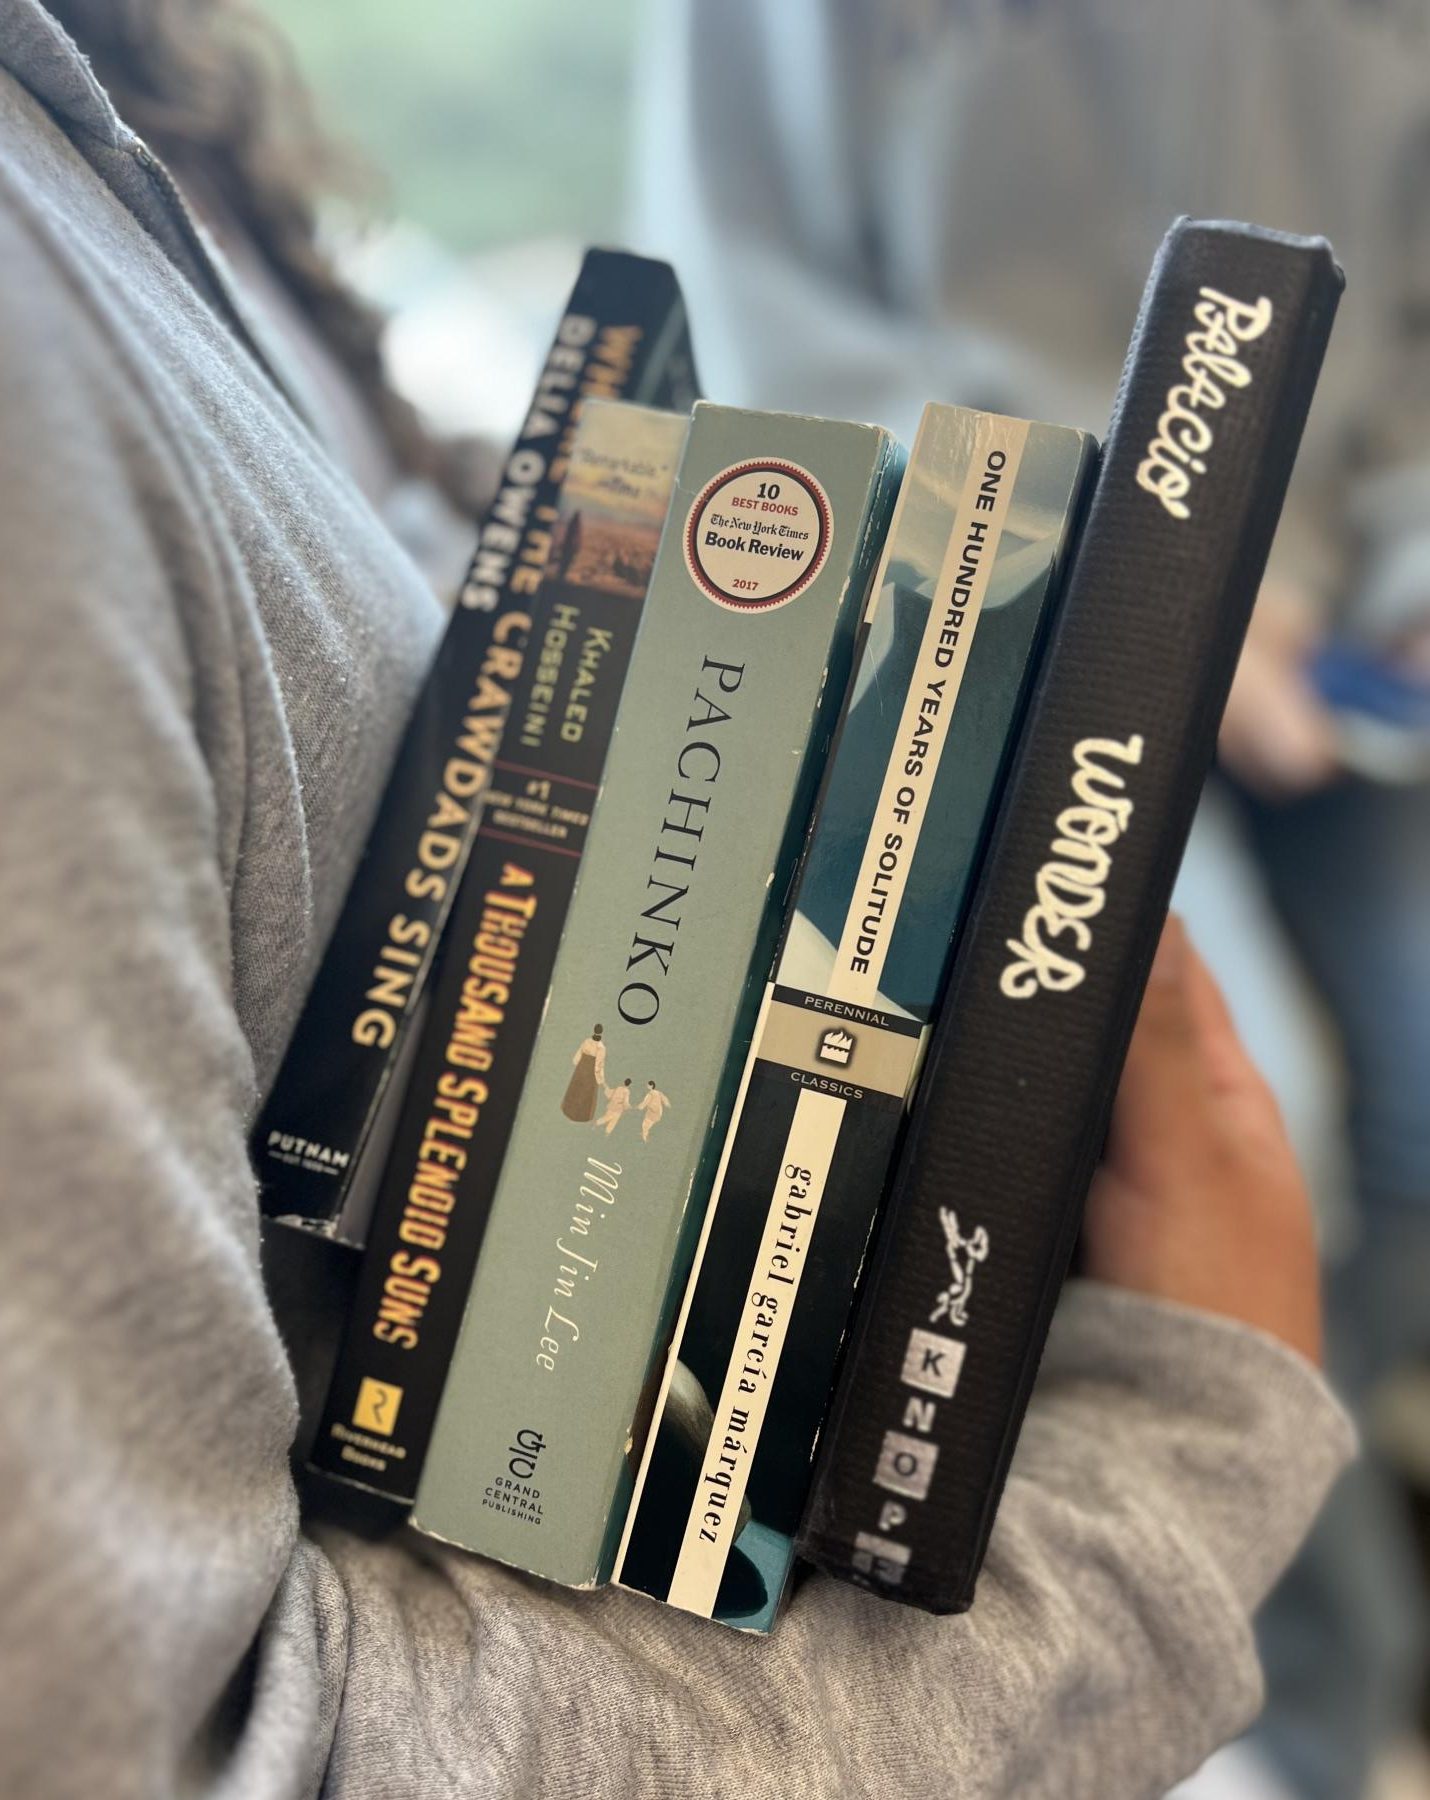 Wildcat staff writer Daisy Mora holds some of the Wildcat staffs favorite books. With genres spanning from historical fiction to magical realism to military history, theres something for everyone for the upcoming vacation days. 